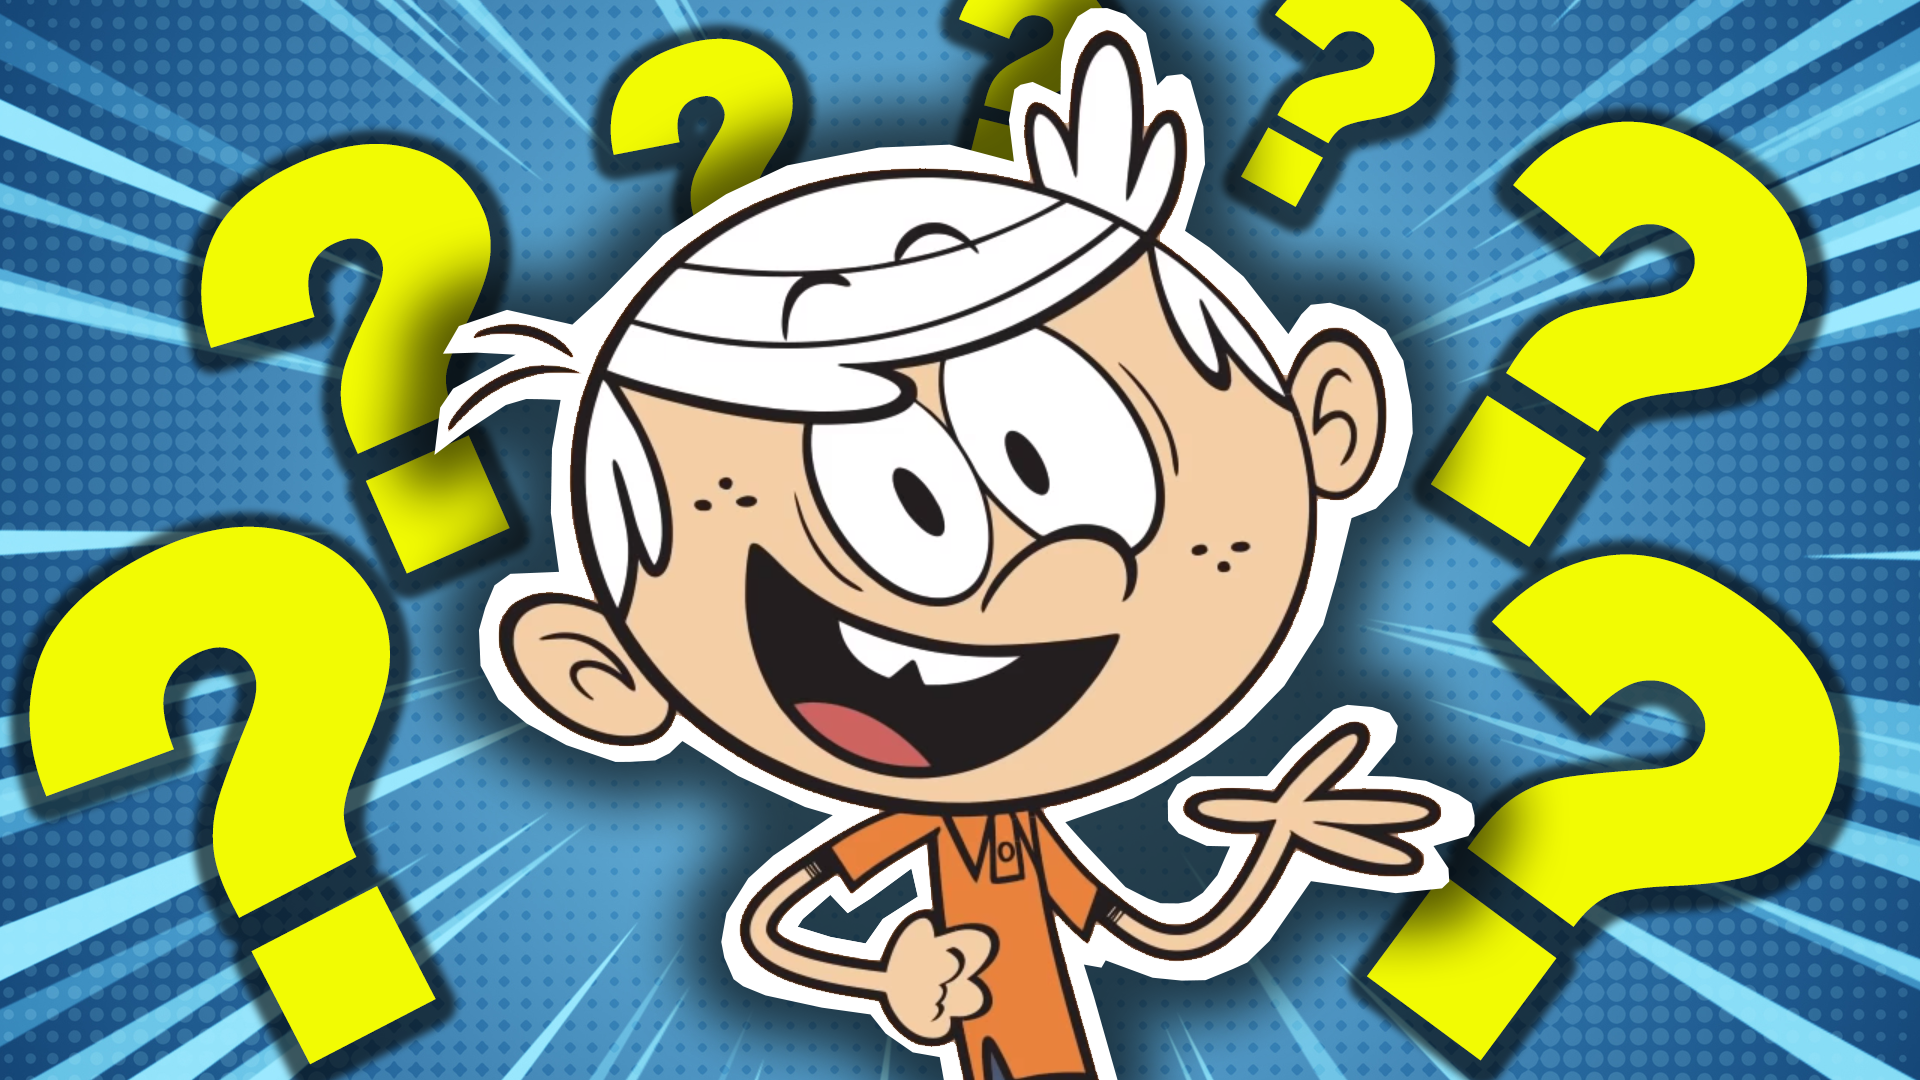 What Loud House Character Am I?